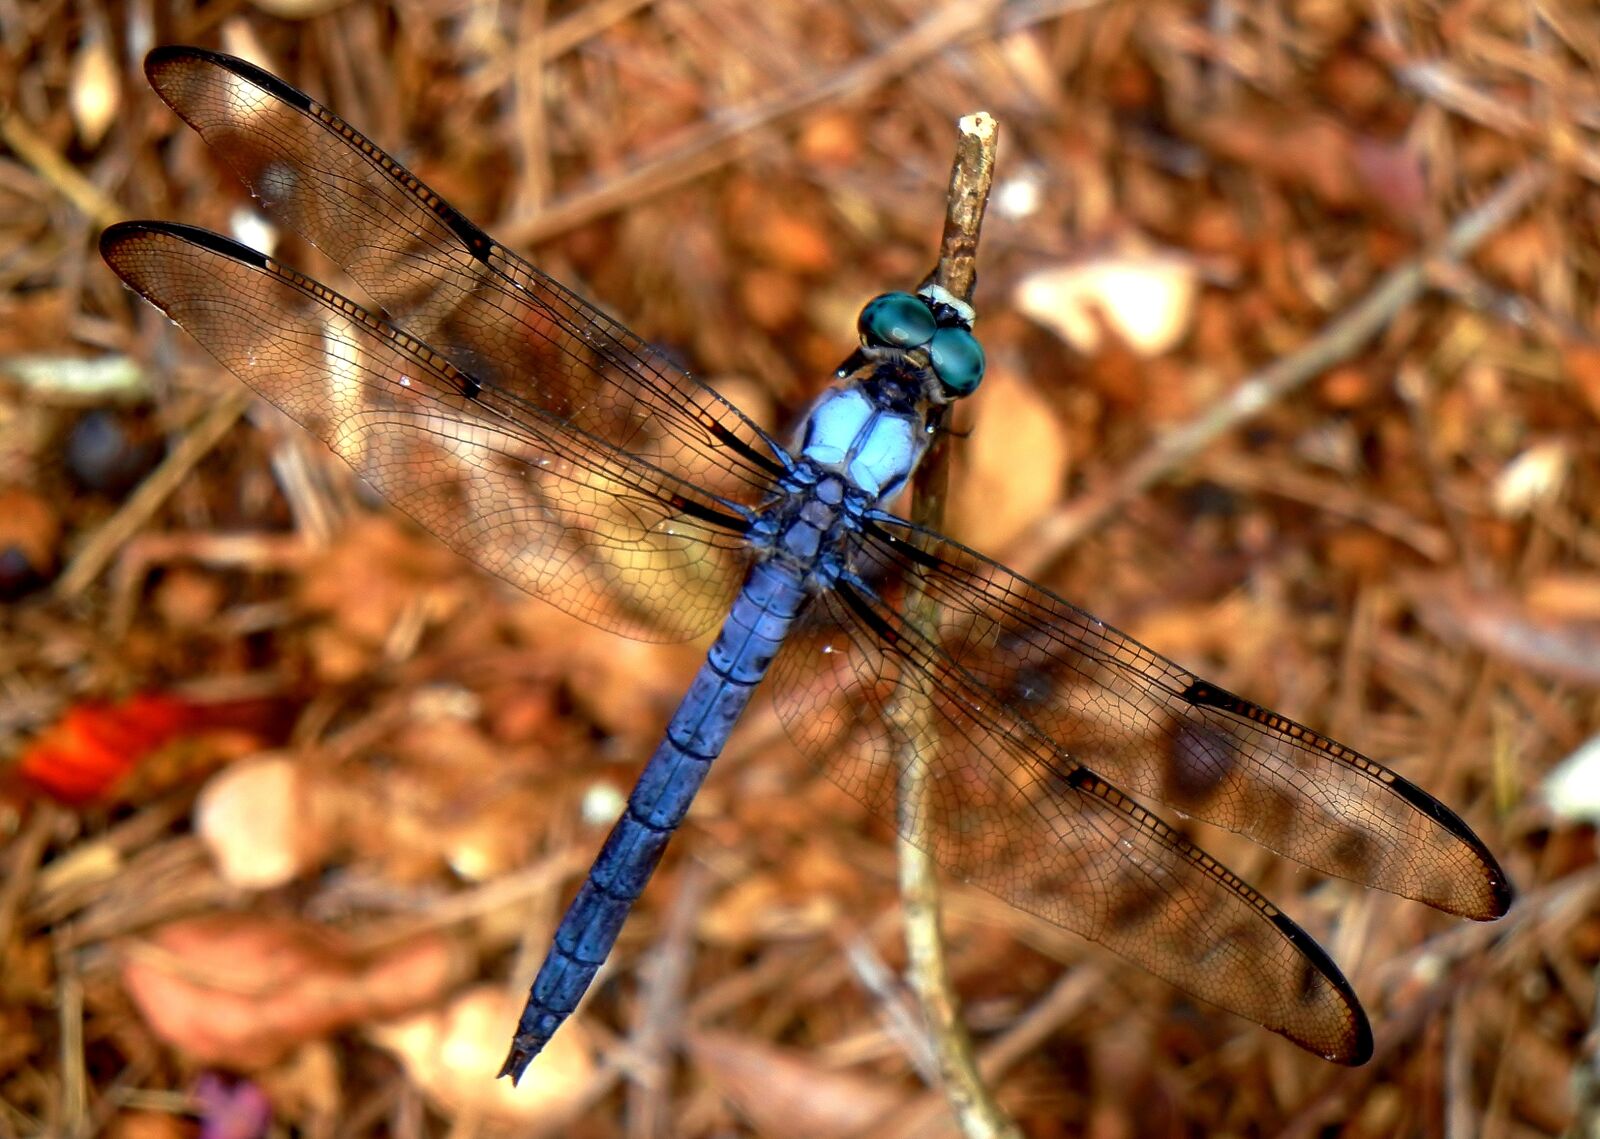 Nikon Coolpix S8100 sample photo. Dragonfly, dragon fly, insect photography